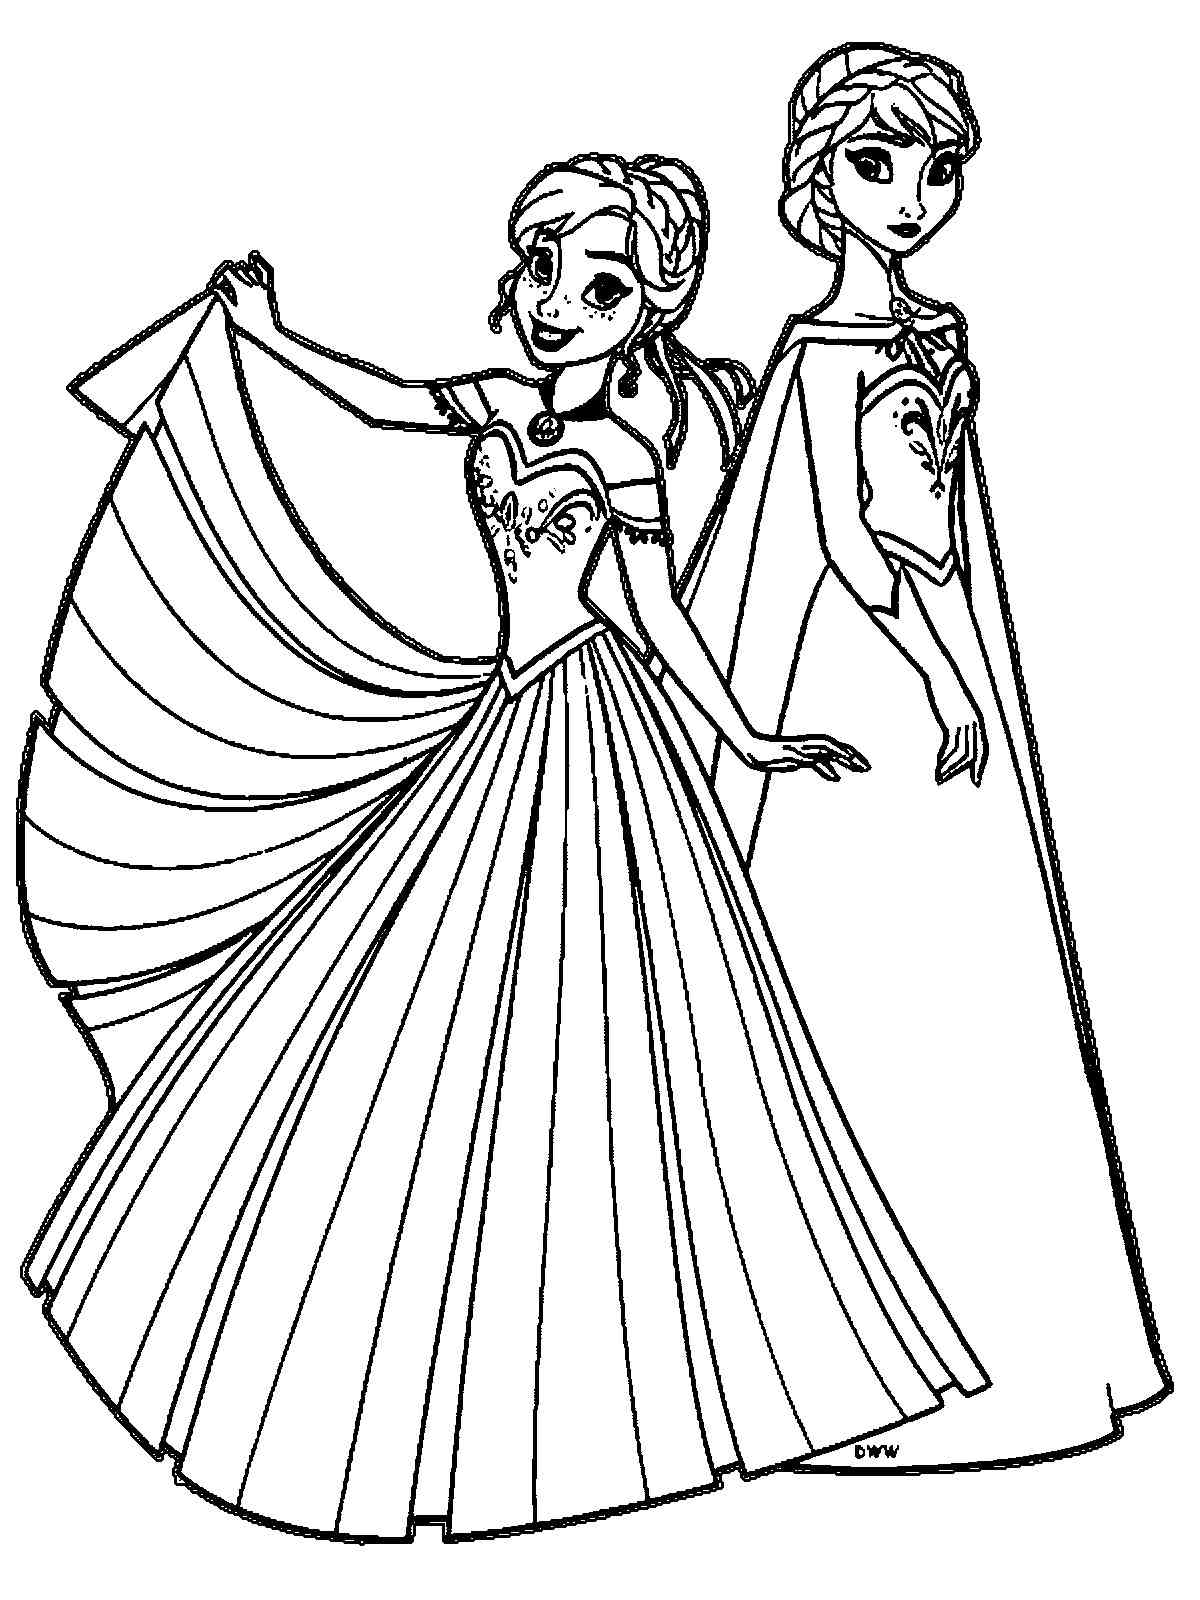 Frozen 9 coloring page